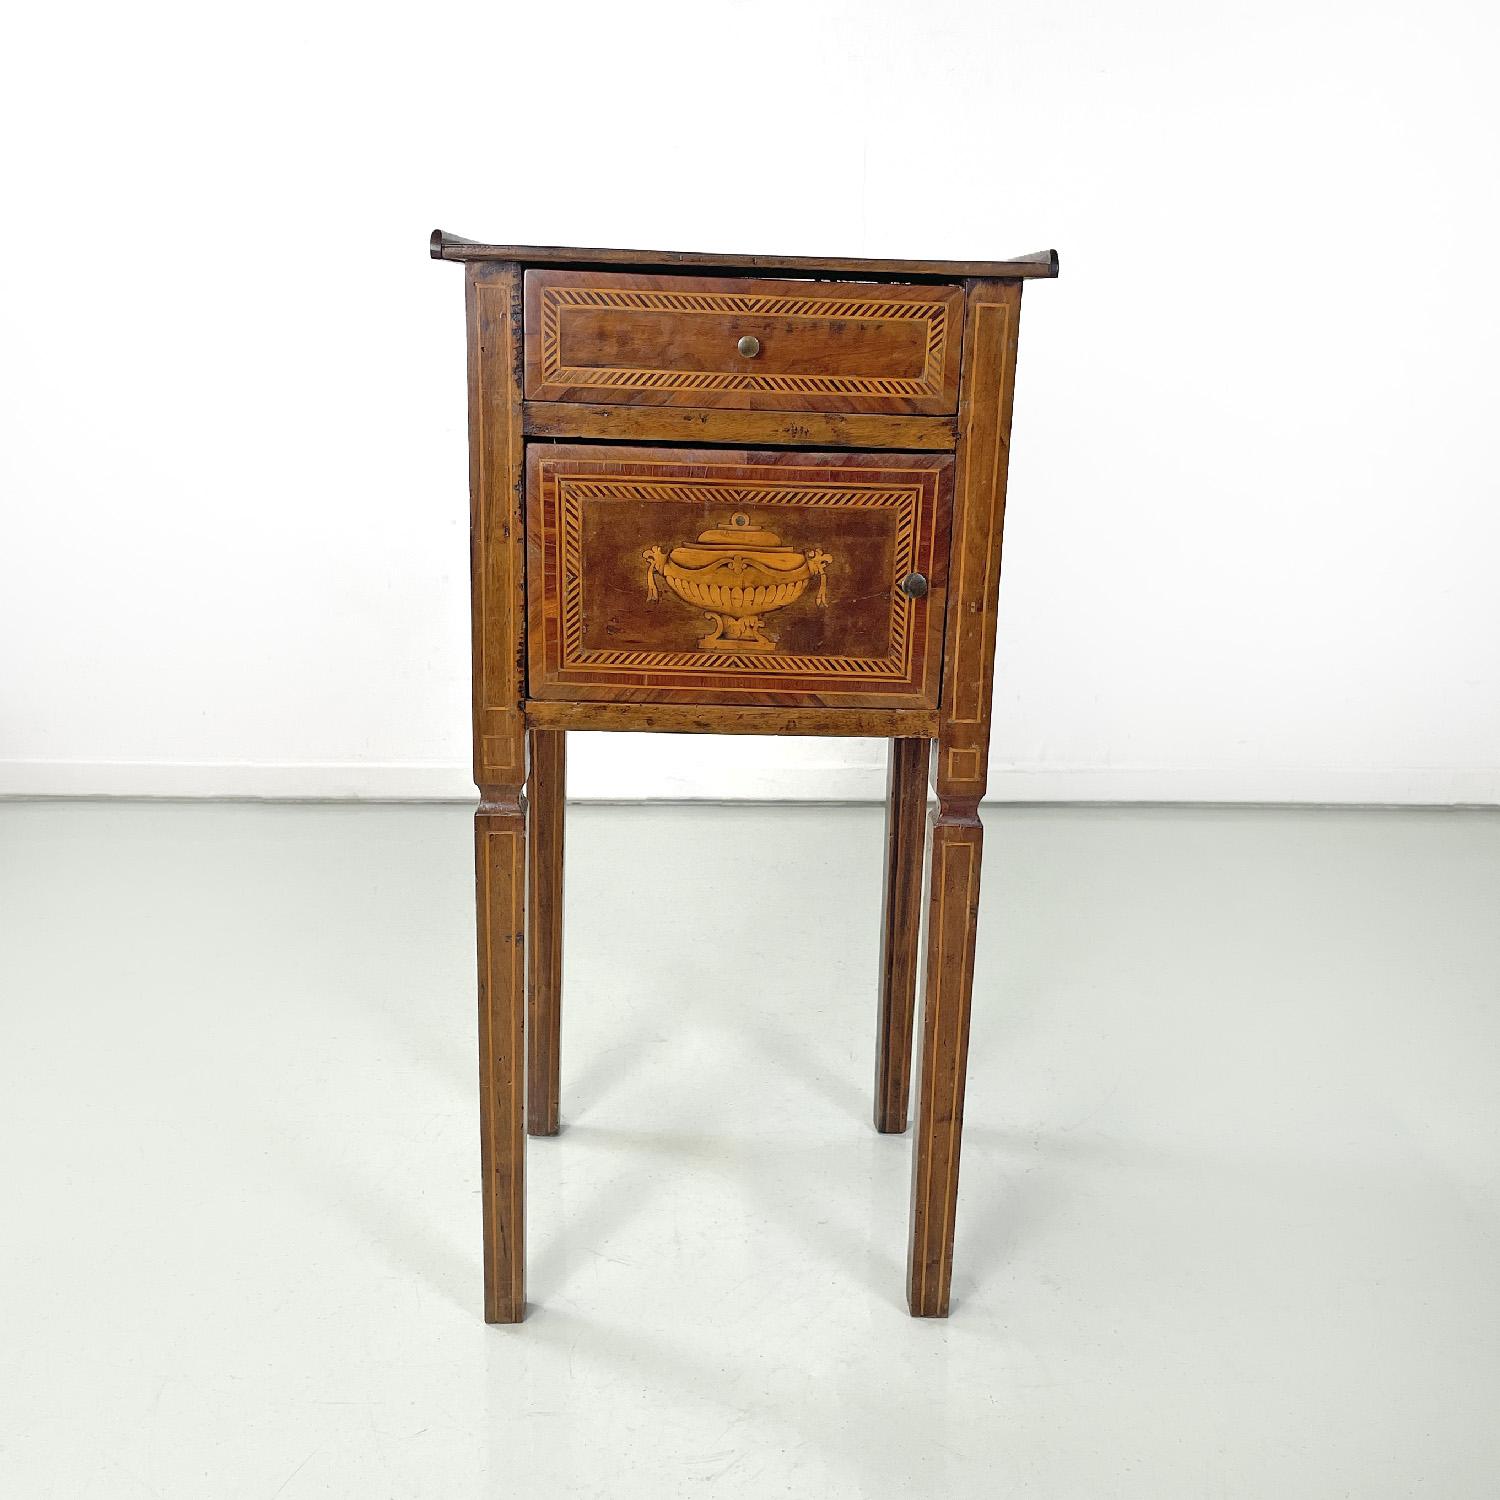 Italian antique wooden bedside tables with inlaid floral decorations, 1750s In Good Condition For Sale In MIlano, IT